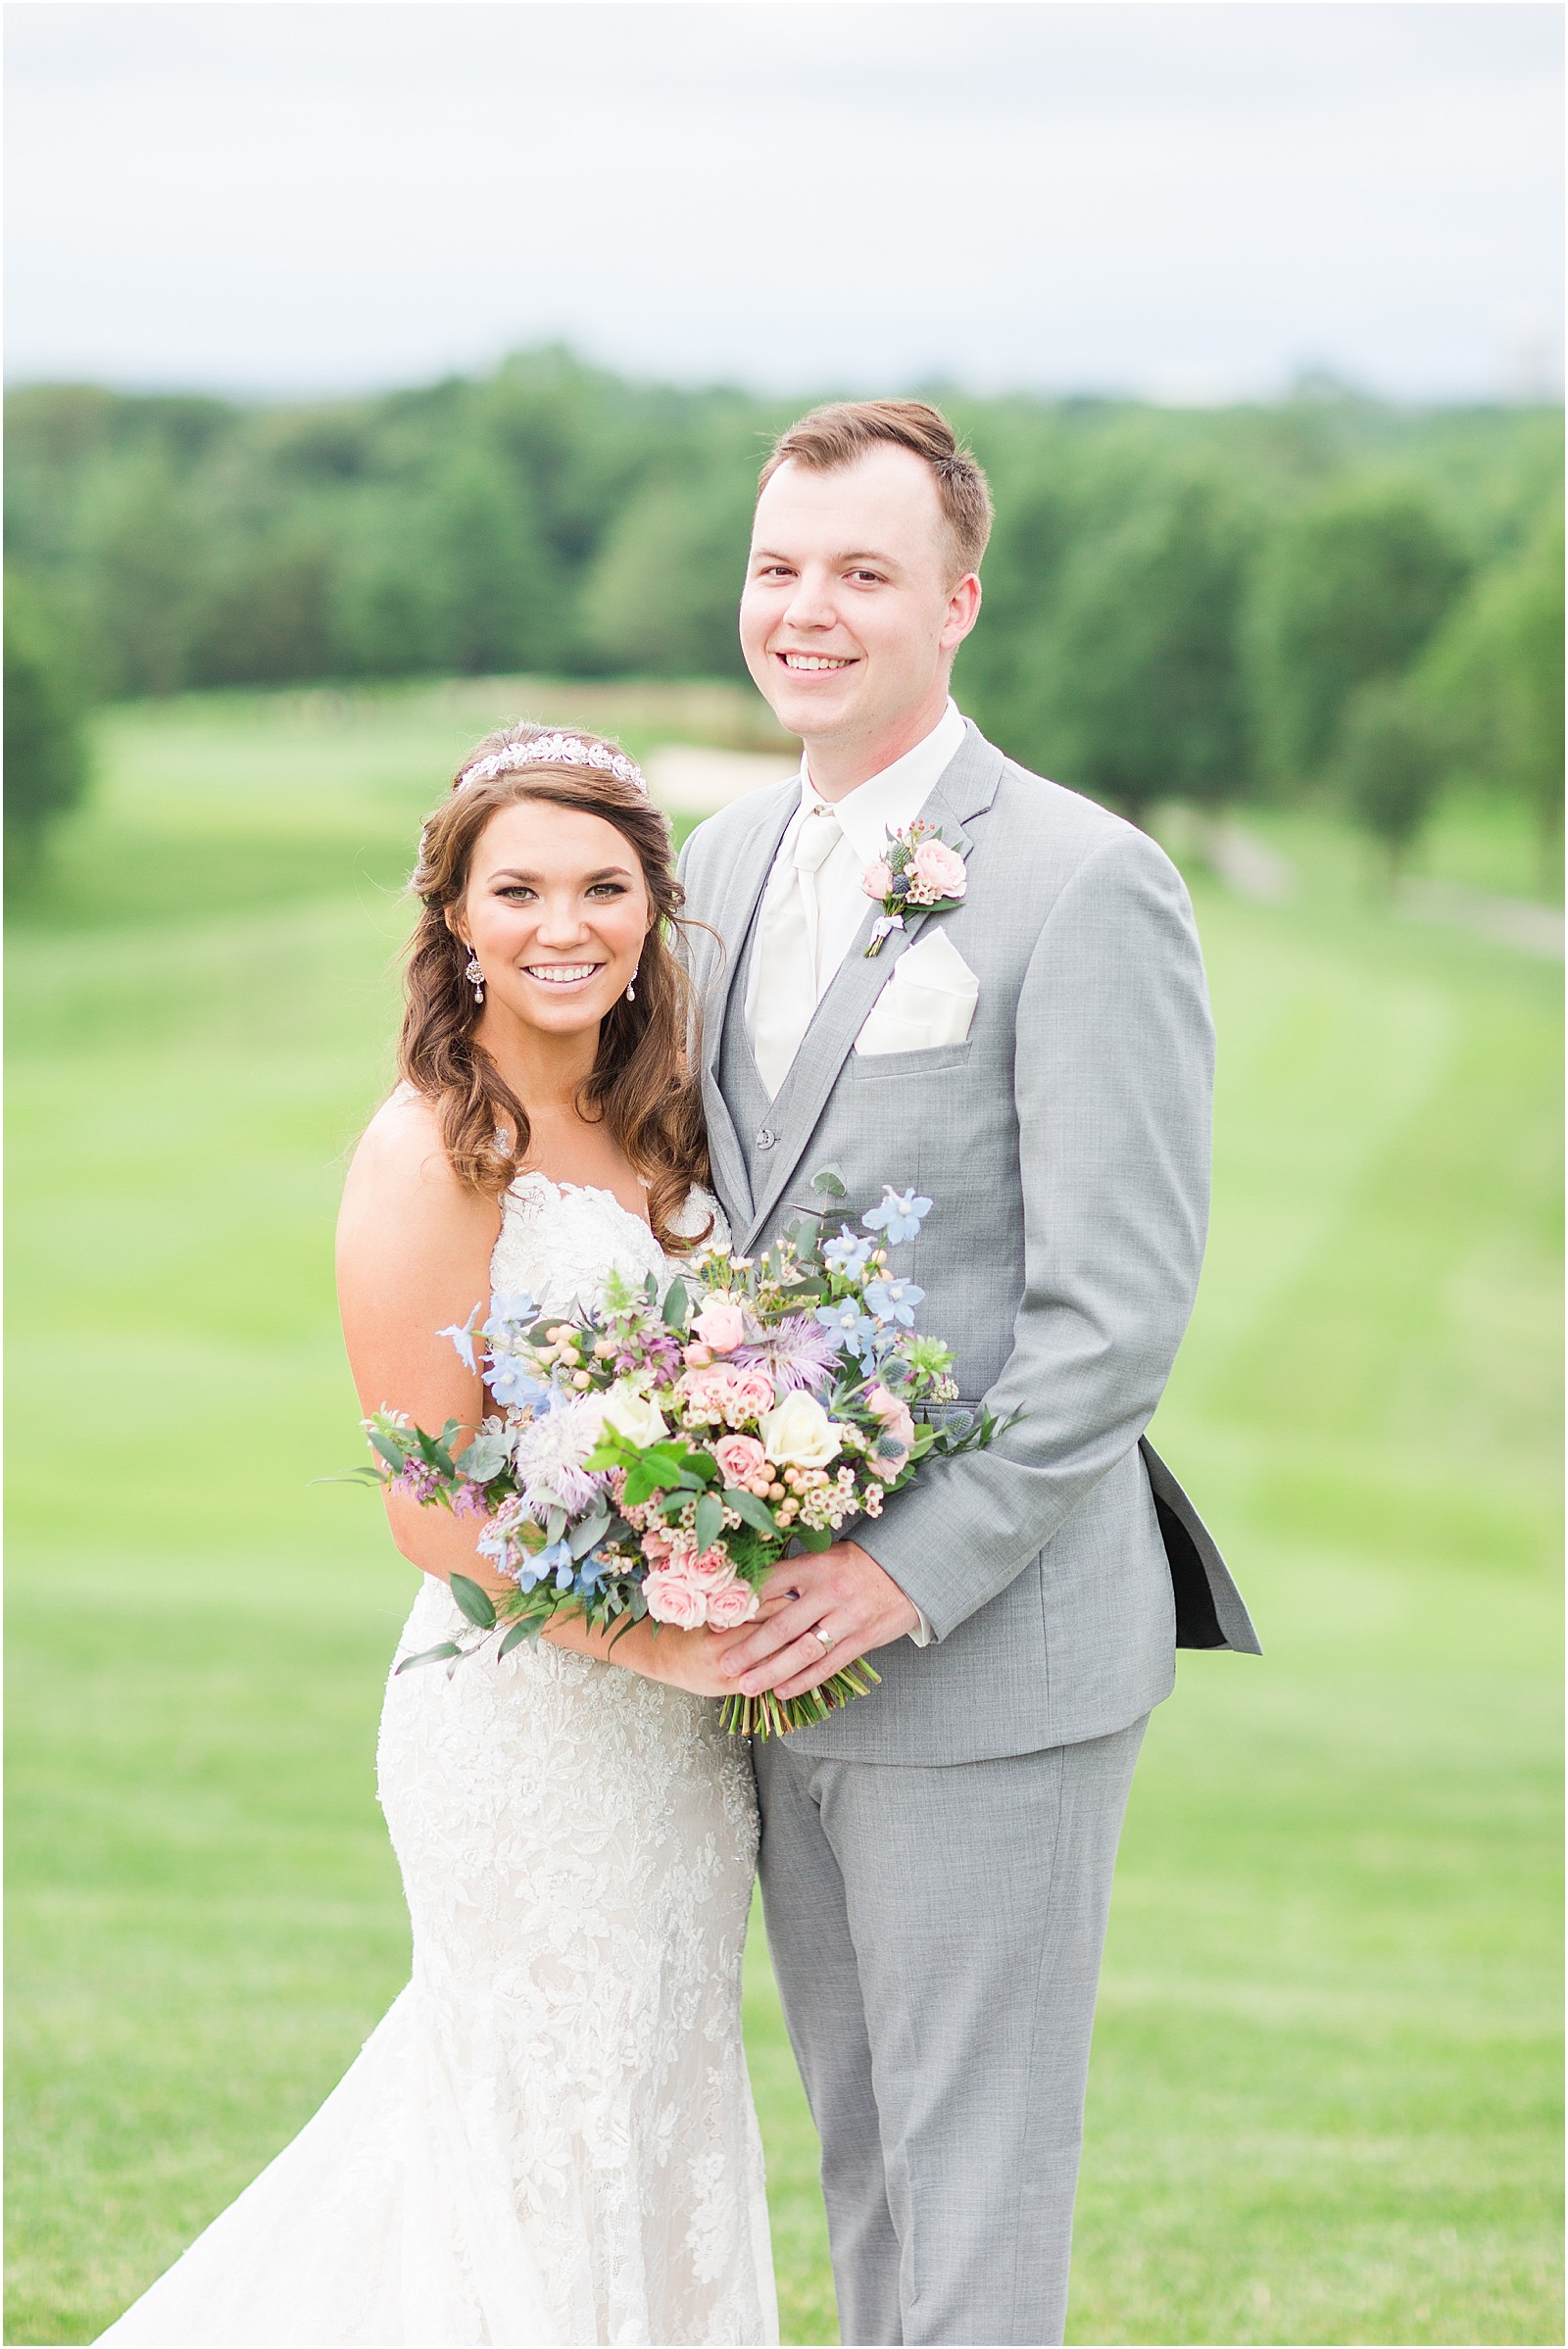 An Evansville County Club Wedding | Abby and Stratton 051.jpg